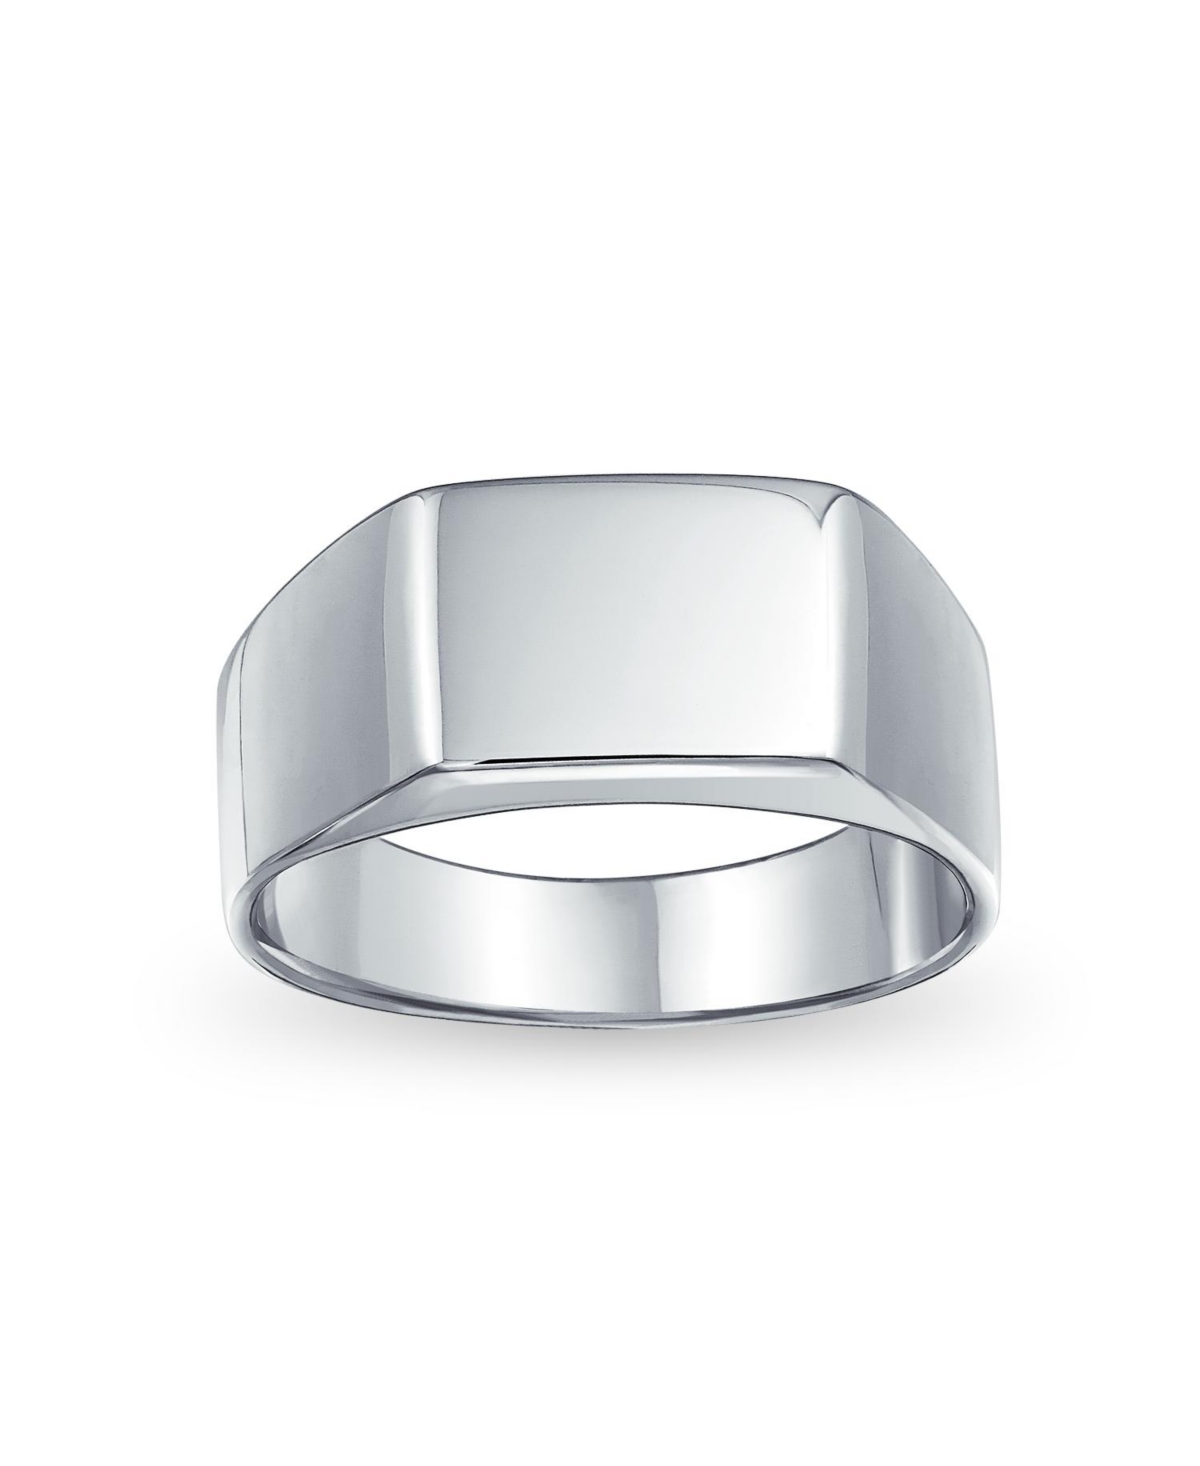 Geometric Simple Wide Rectangle Signet Ring For Men .925 Sterling Silver Shinny Finish - Silver